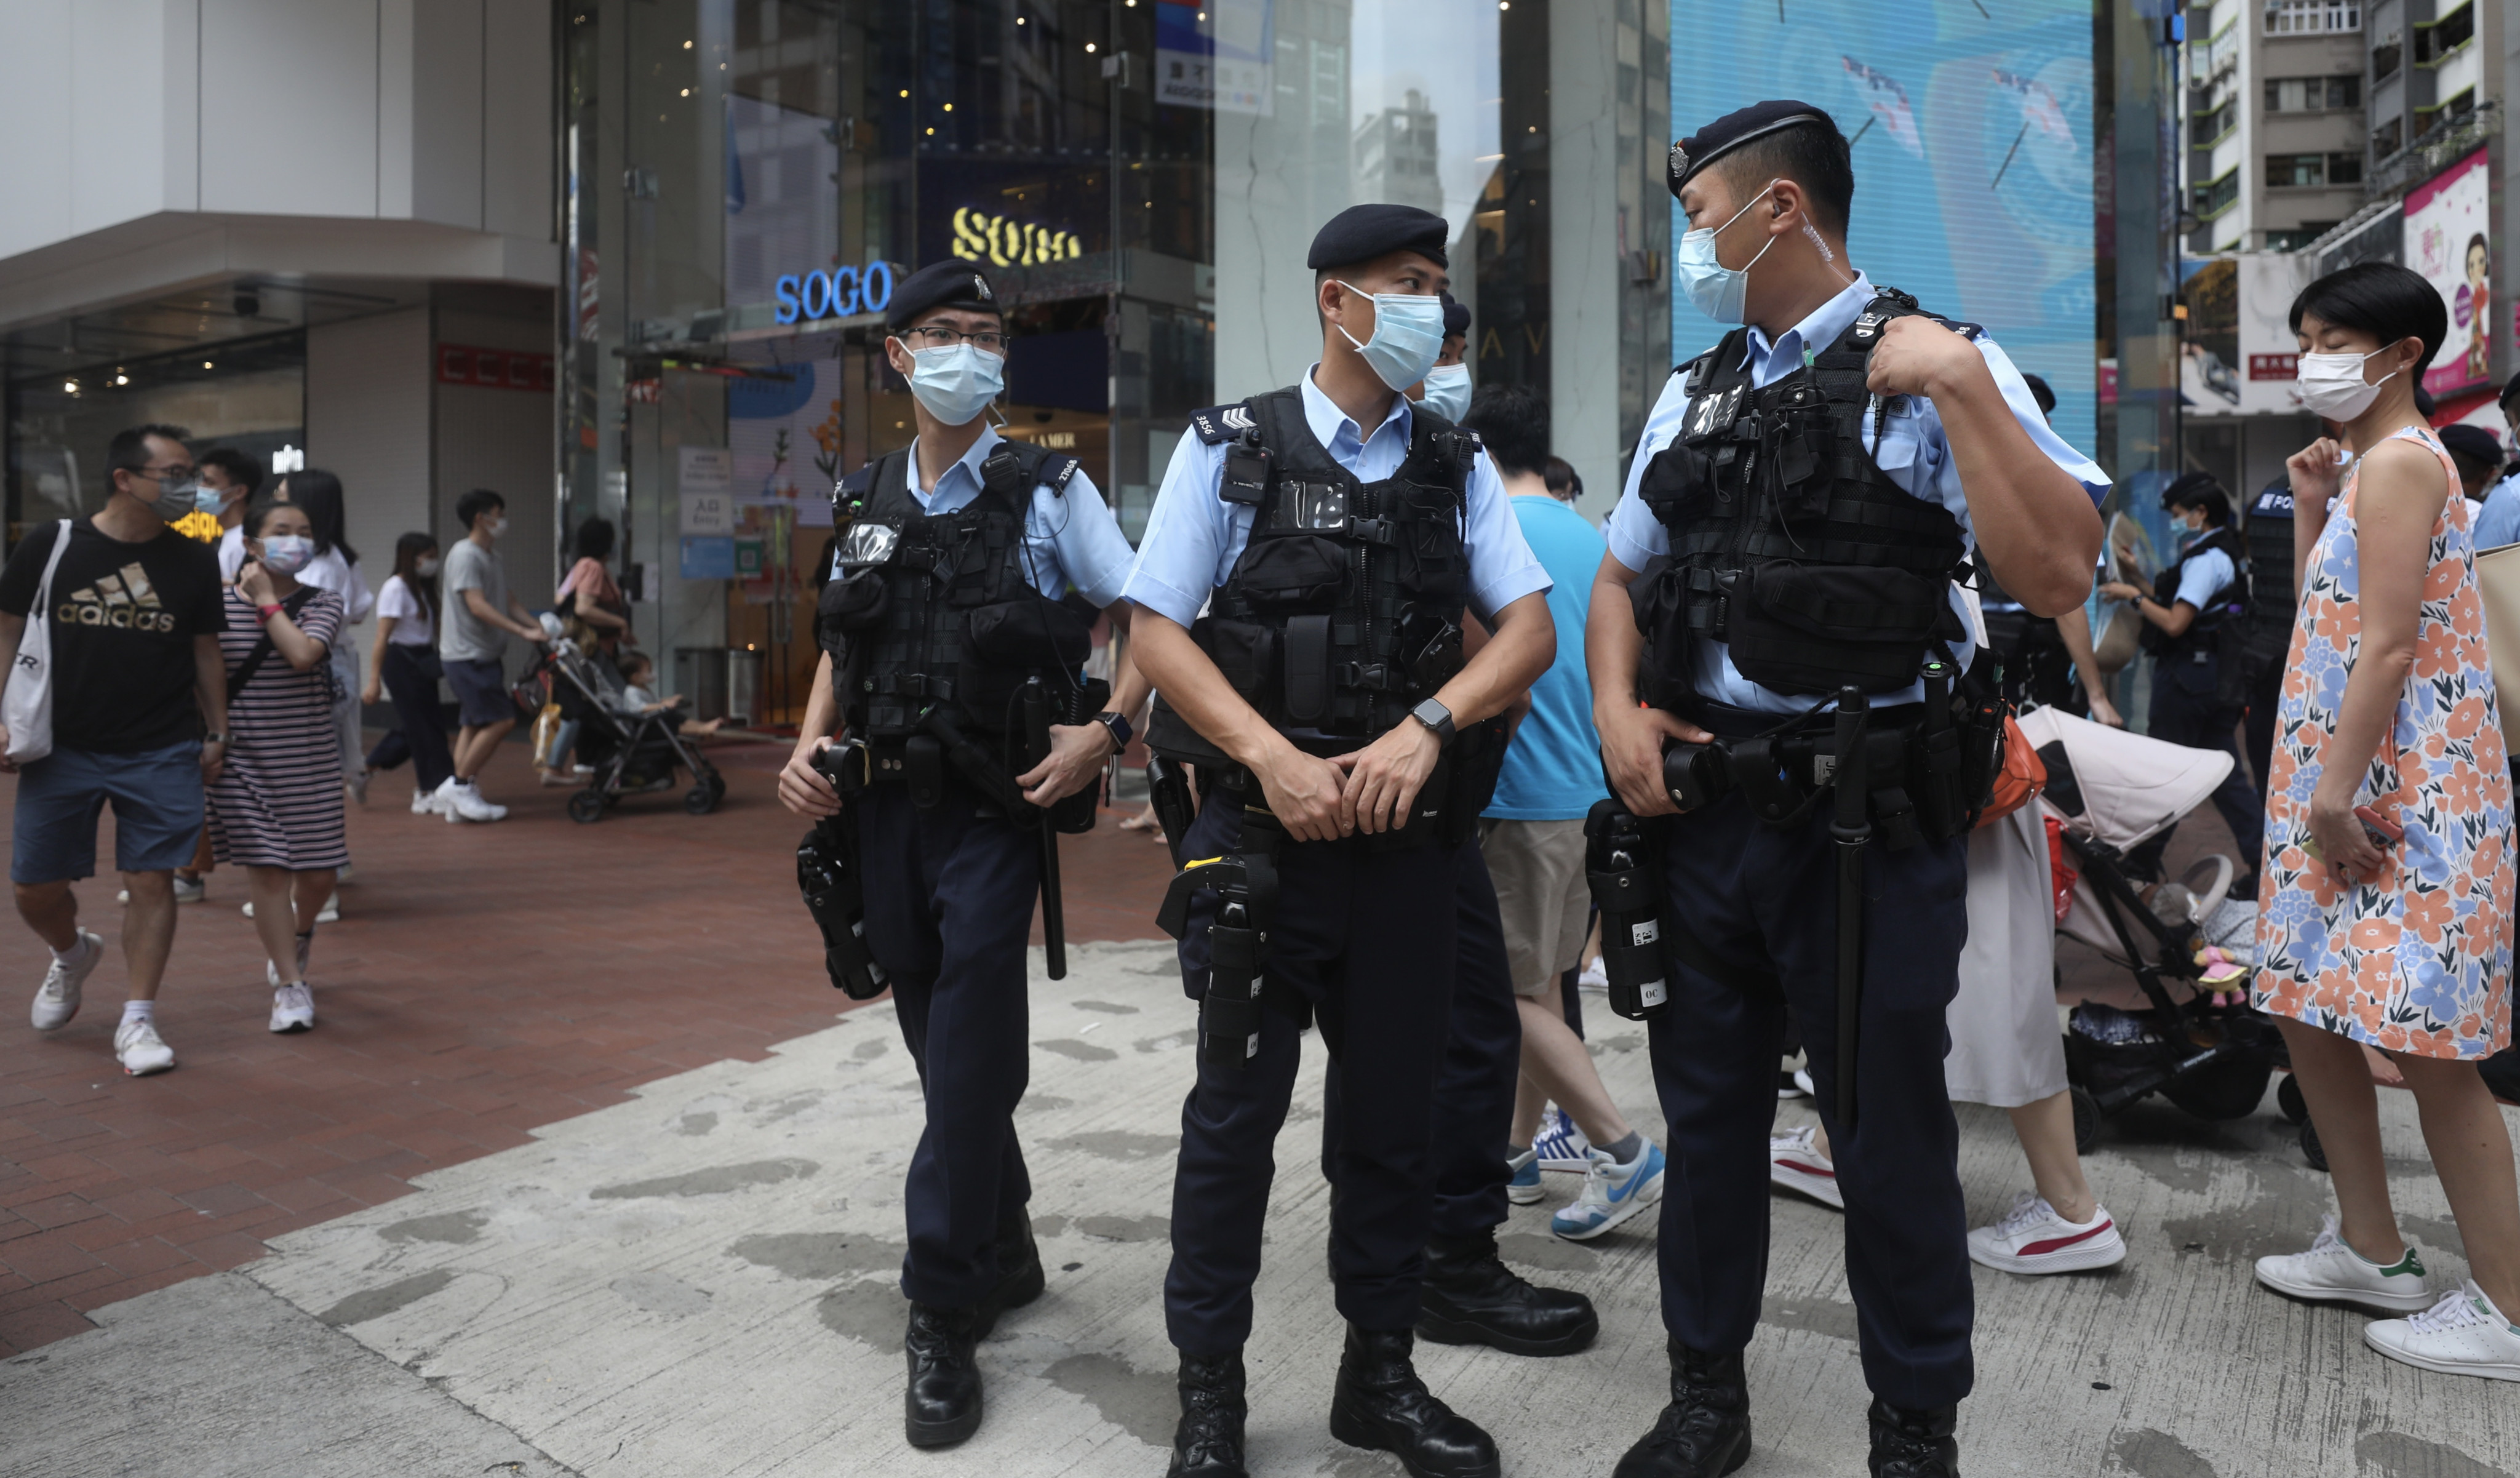 A heightened police presence outside the Sogo department store on Causeway Bay in the wake of a knife attack on a police officer on July 1, 2021. Photo: Xiaomei Chen